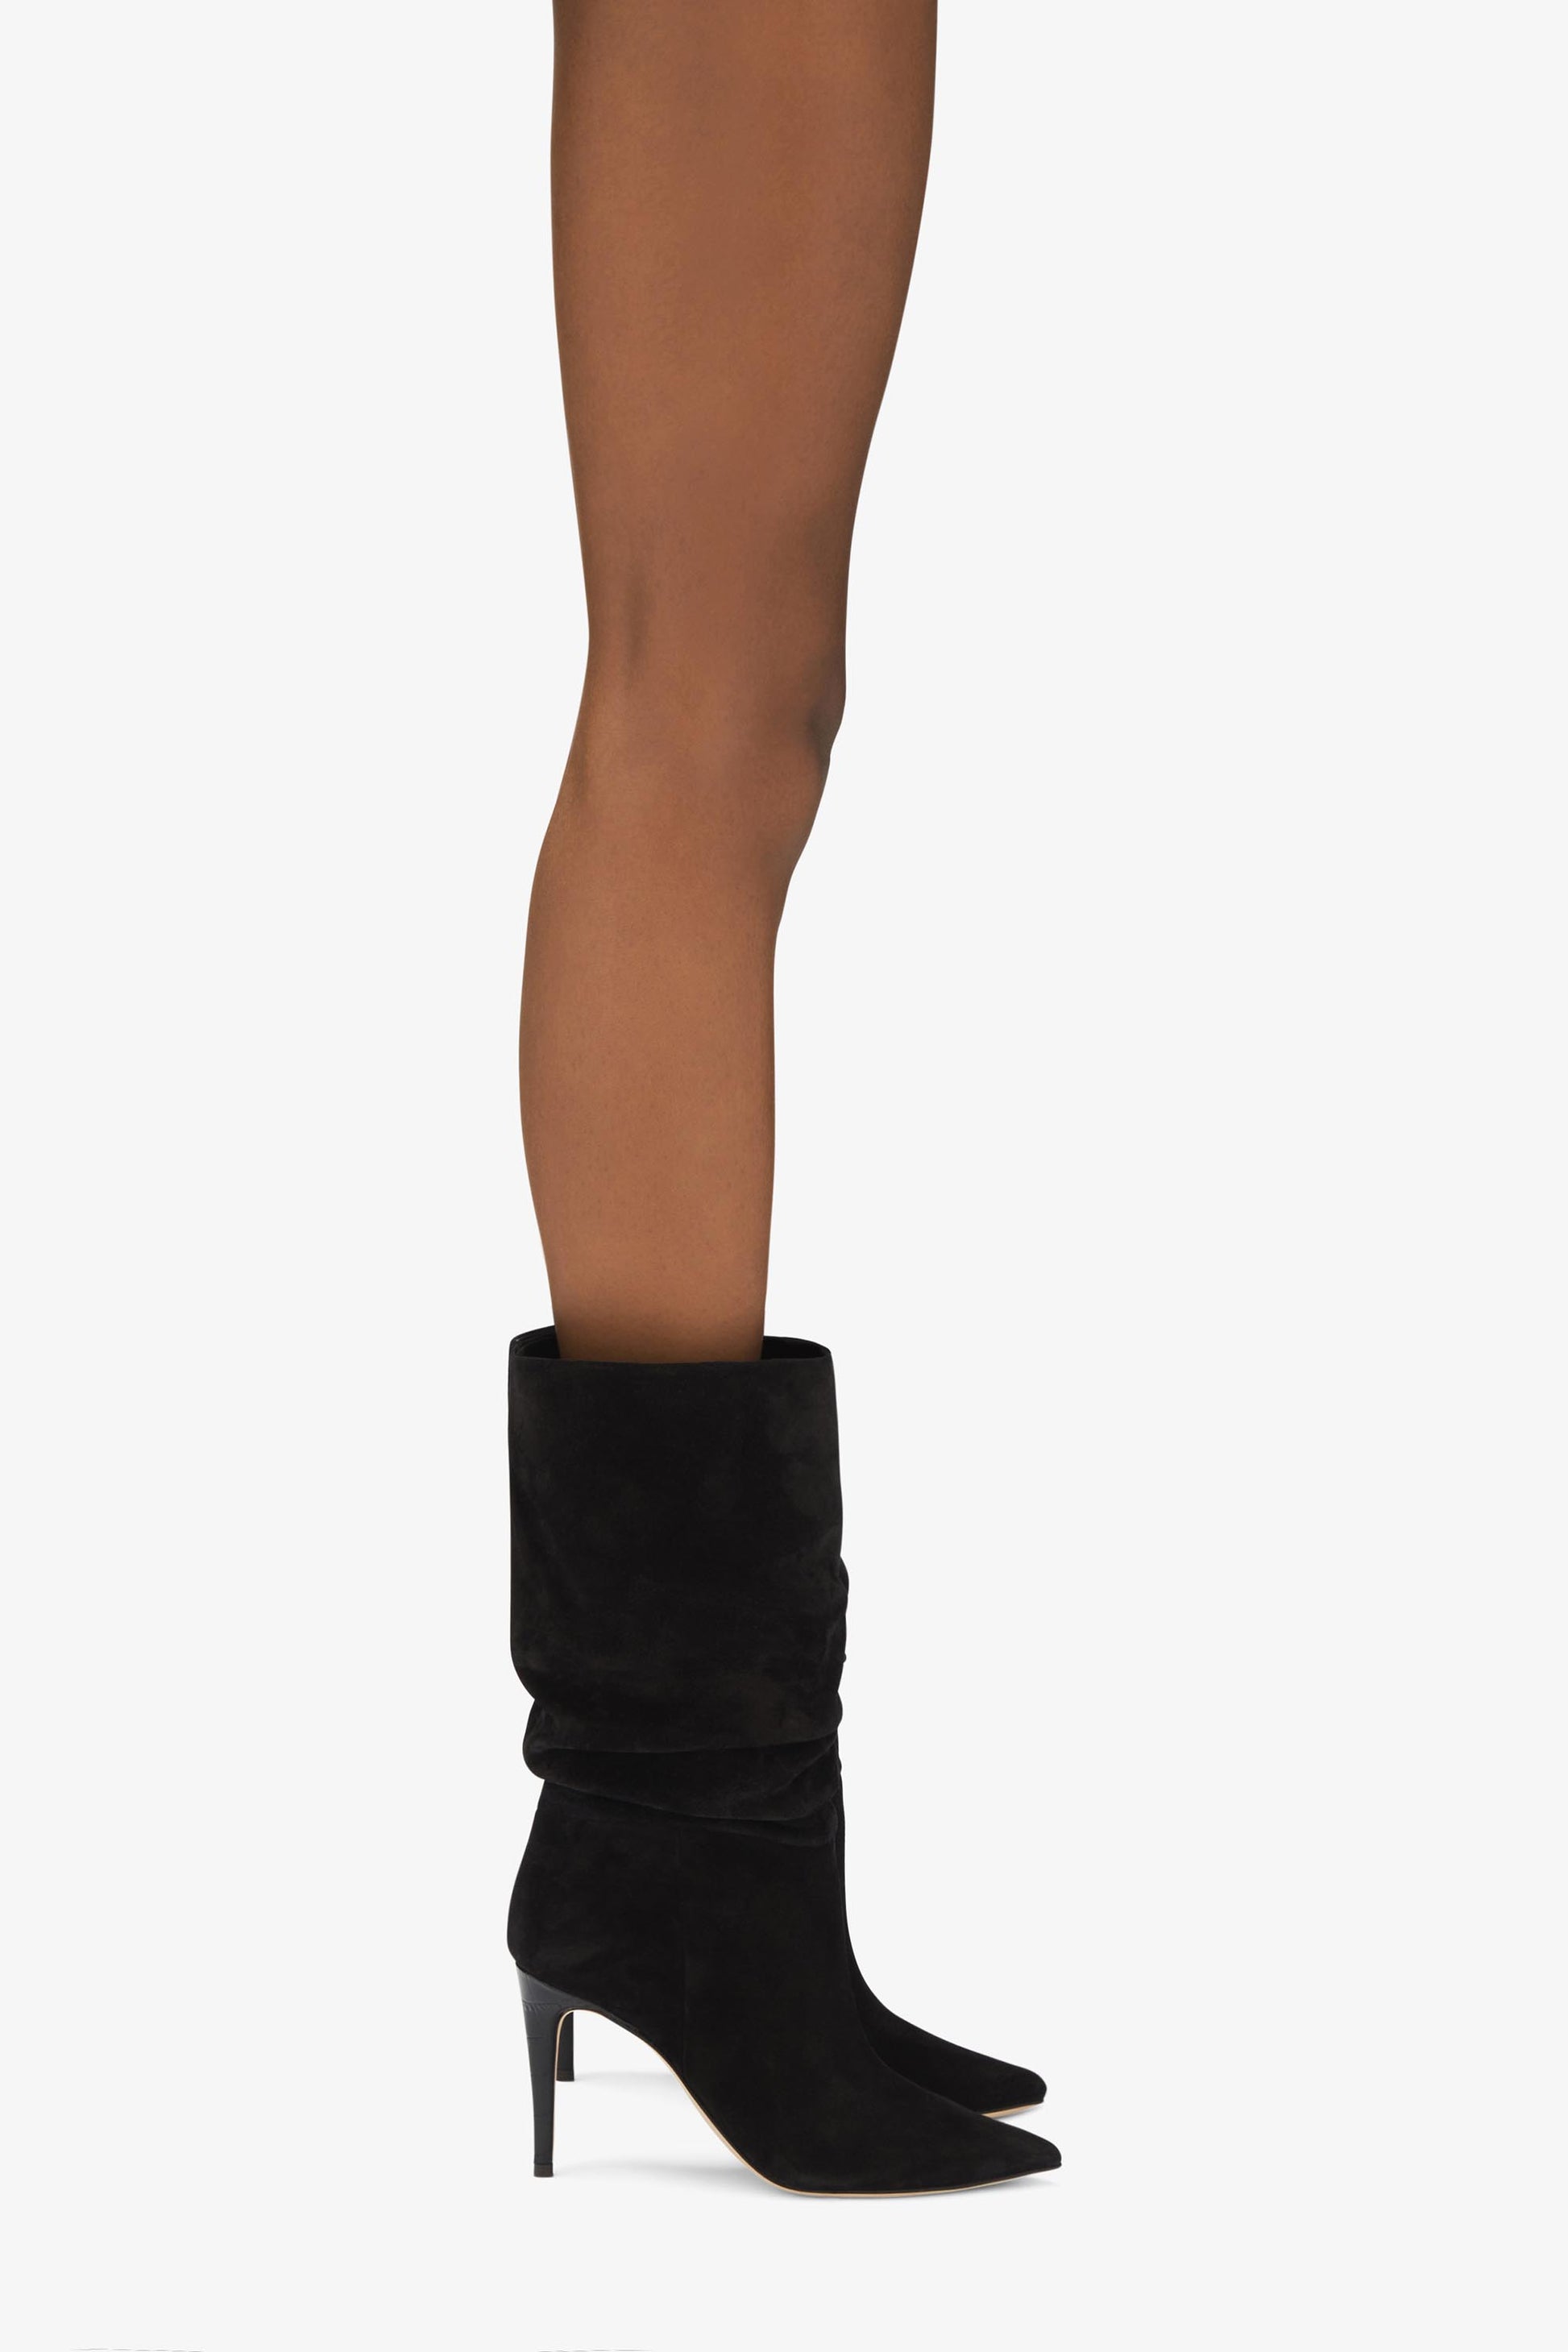 Black calf suede heel 85 slouchy boots - Product worn